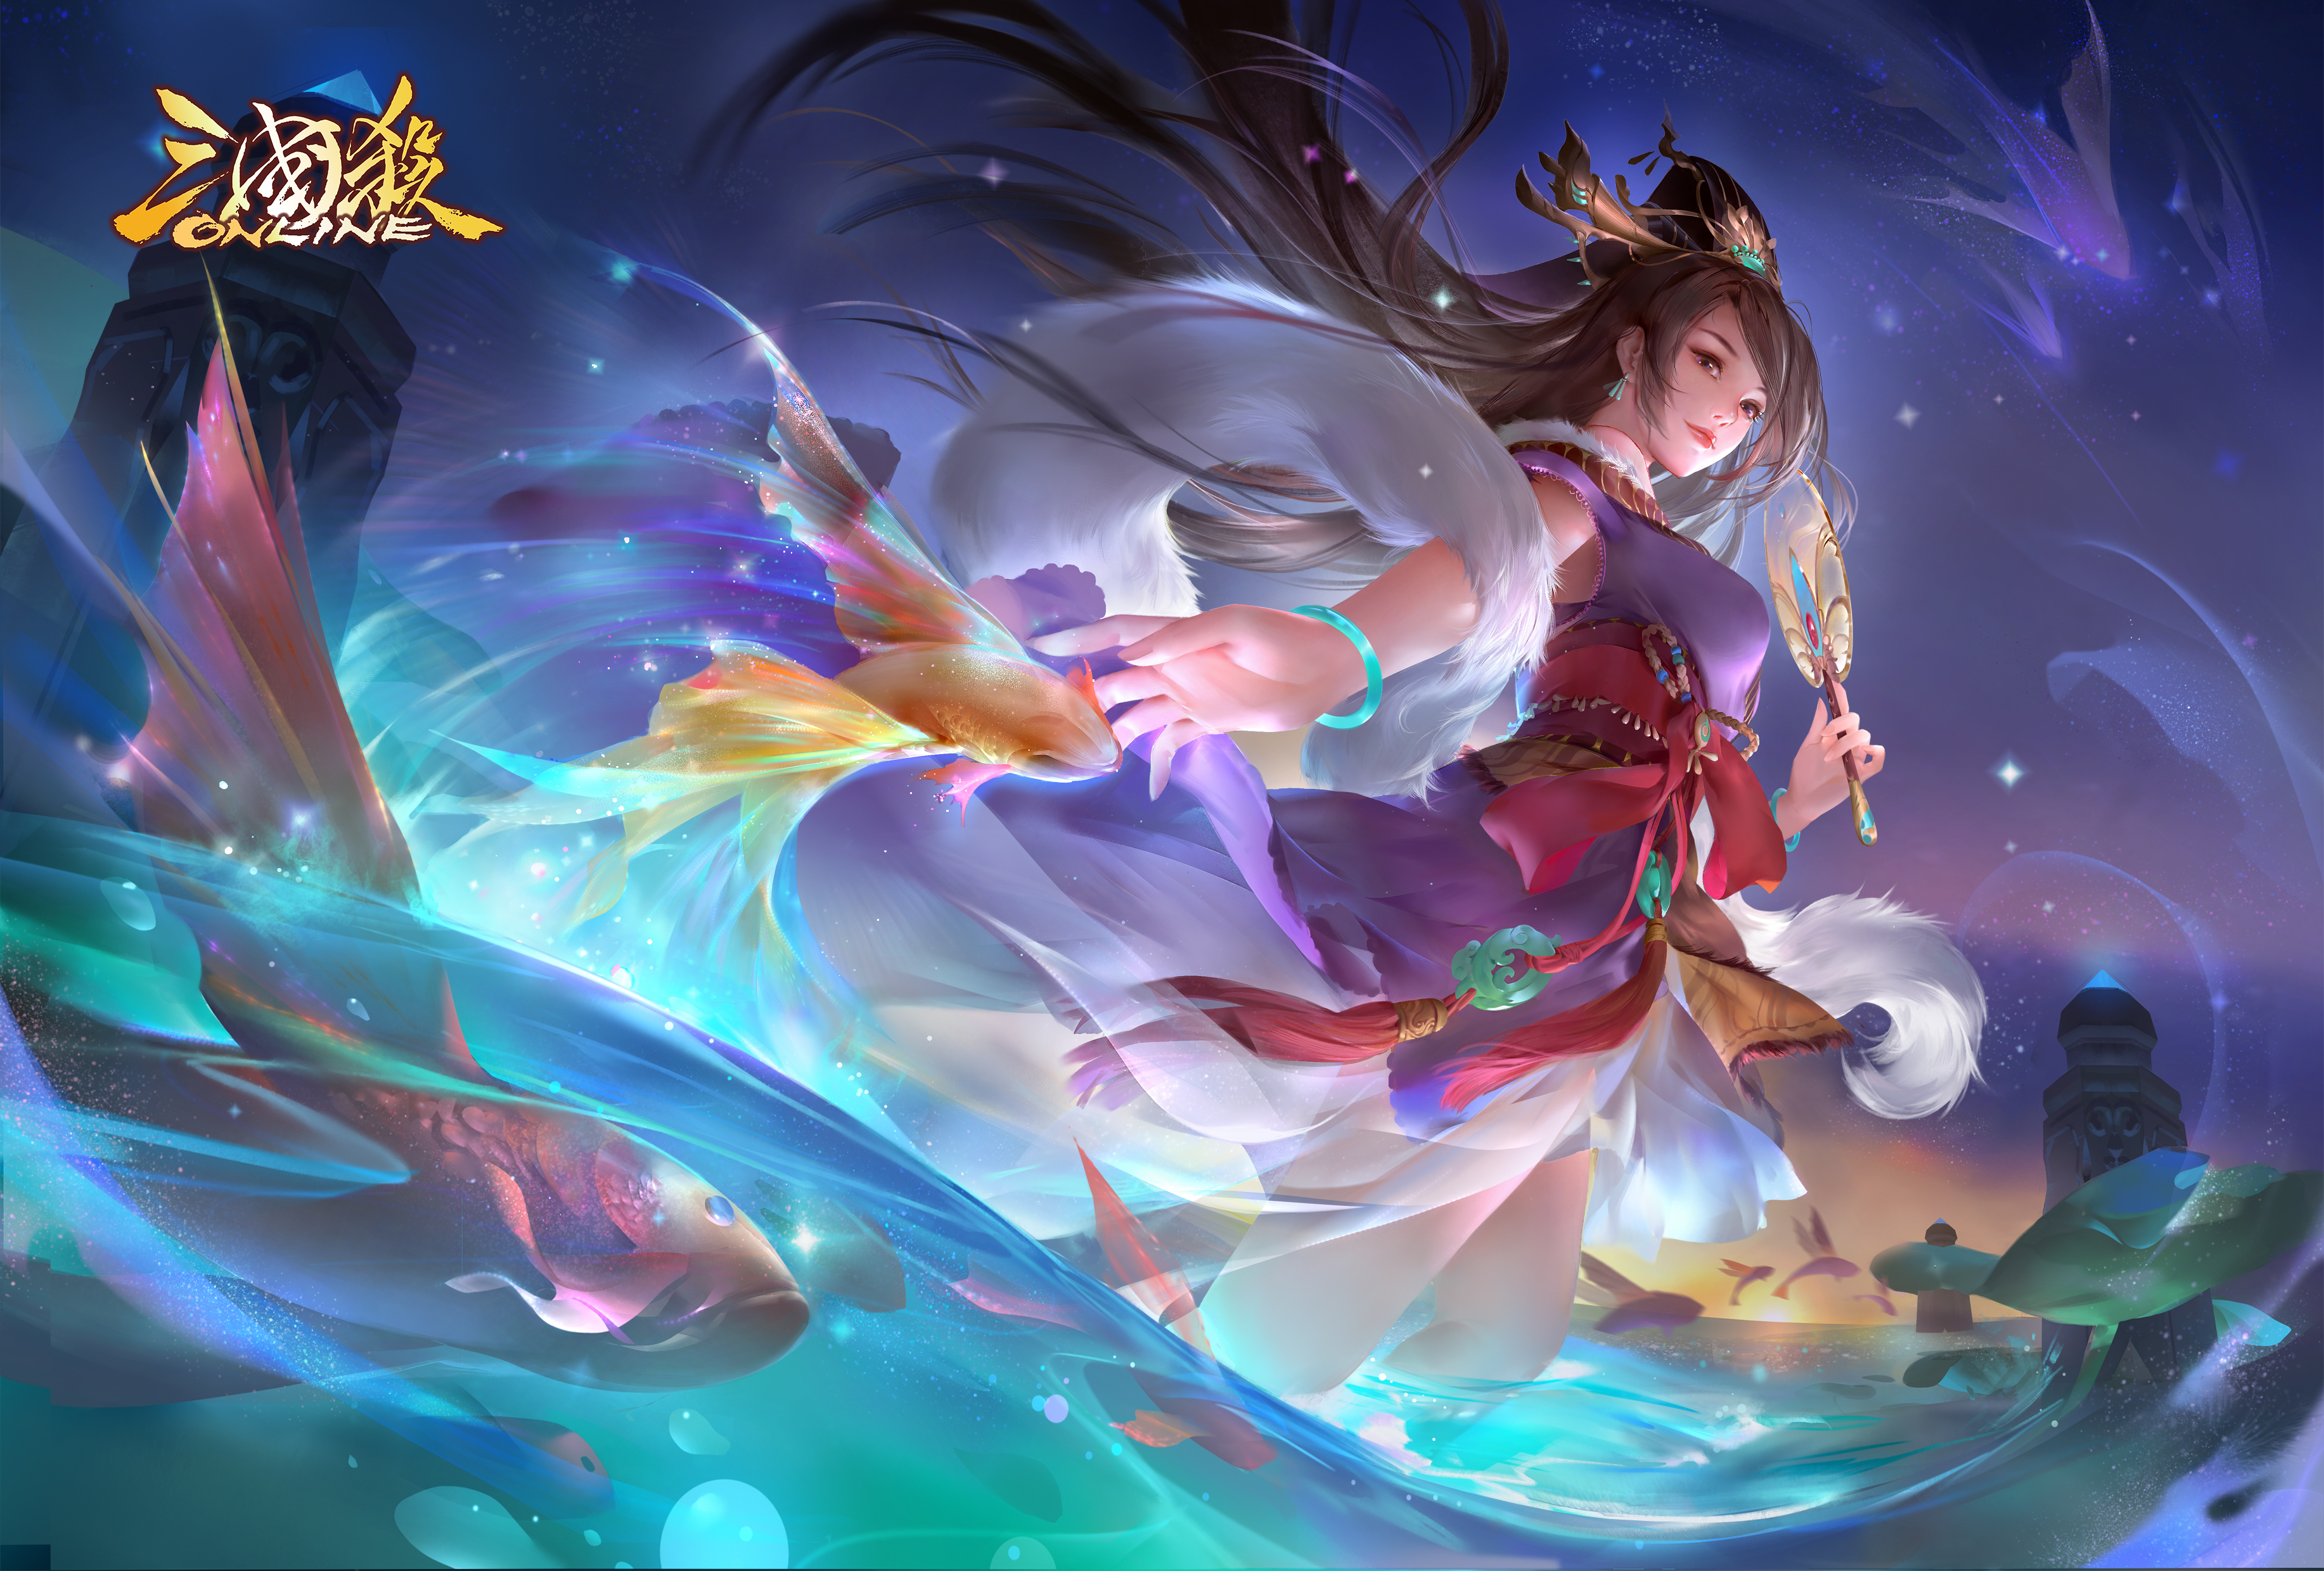 Video Game Characters Three Kingdoms Video Games Video Game Art Video Game Girls Fish Water Fans 3667x2479